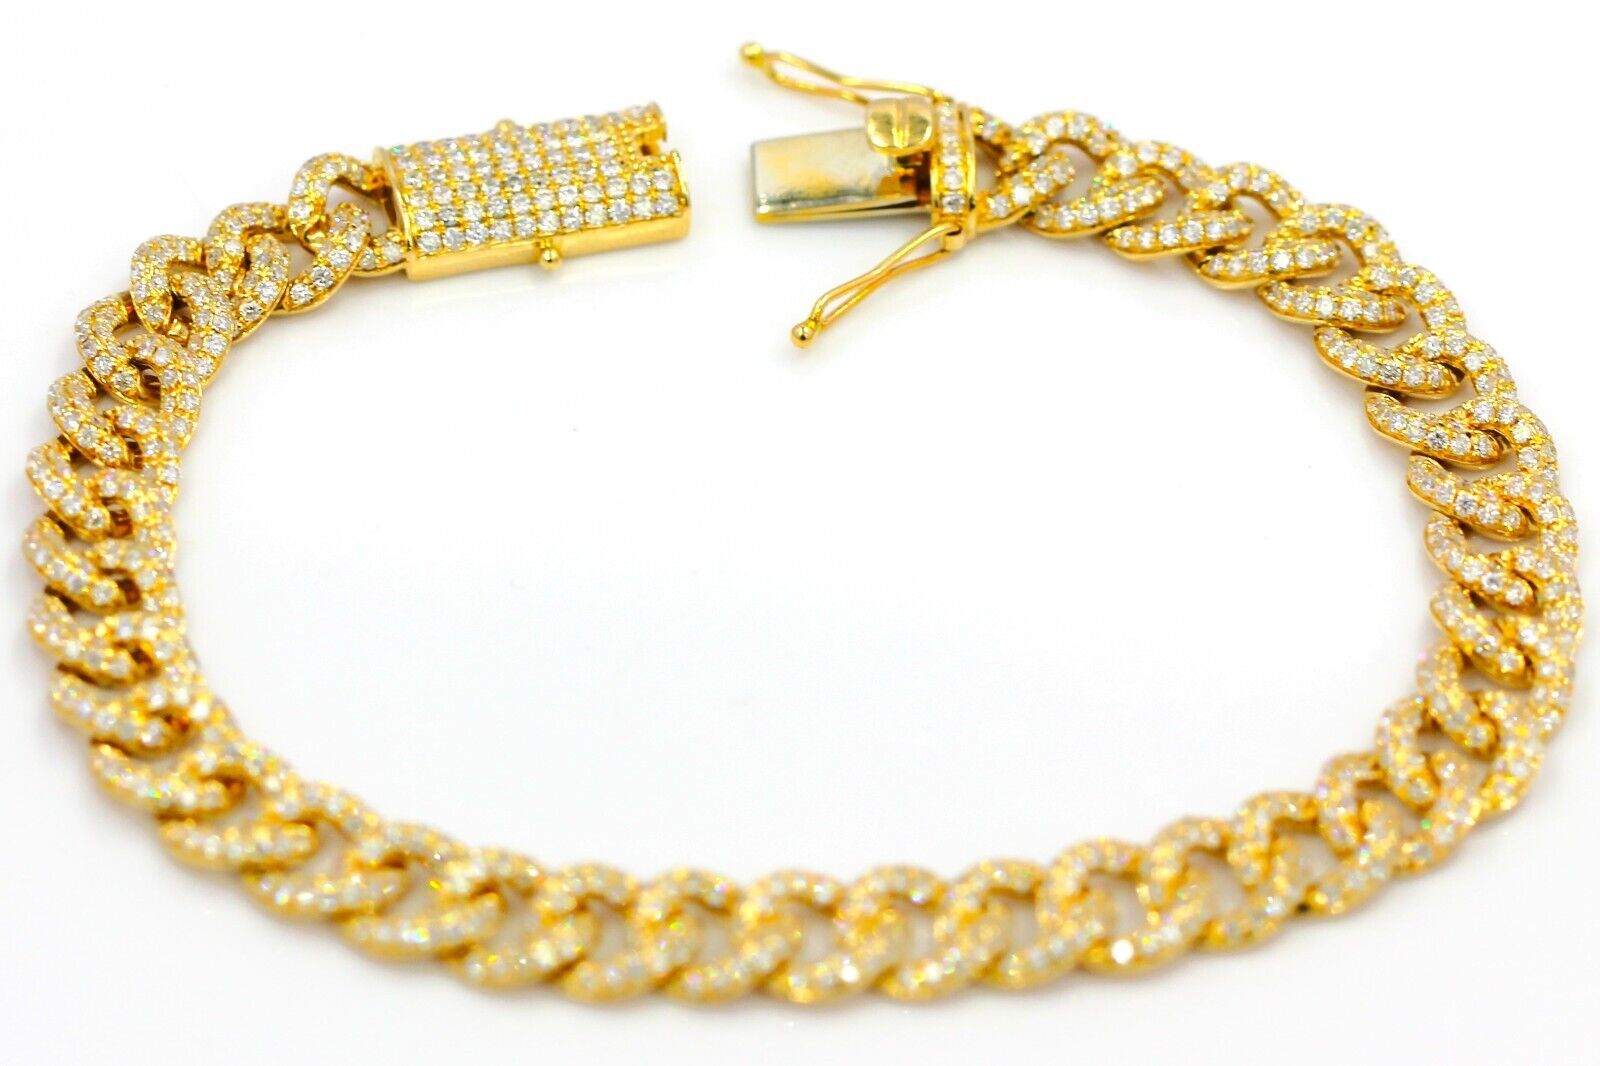 Real Solid 14K Yellow Gold Cuban Chain Bracelet Natural Diamond  5.45 CTW 8